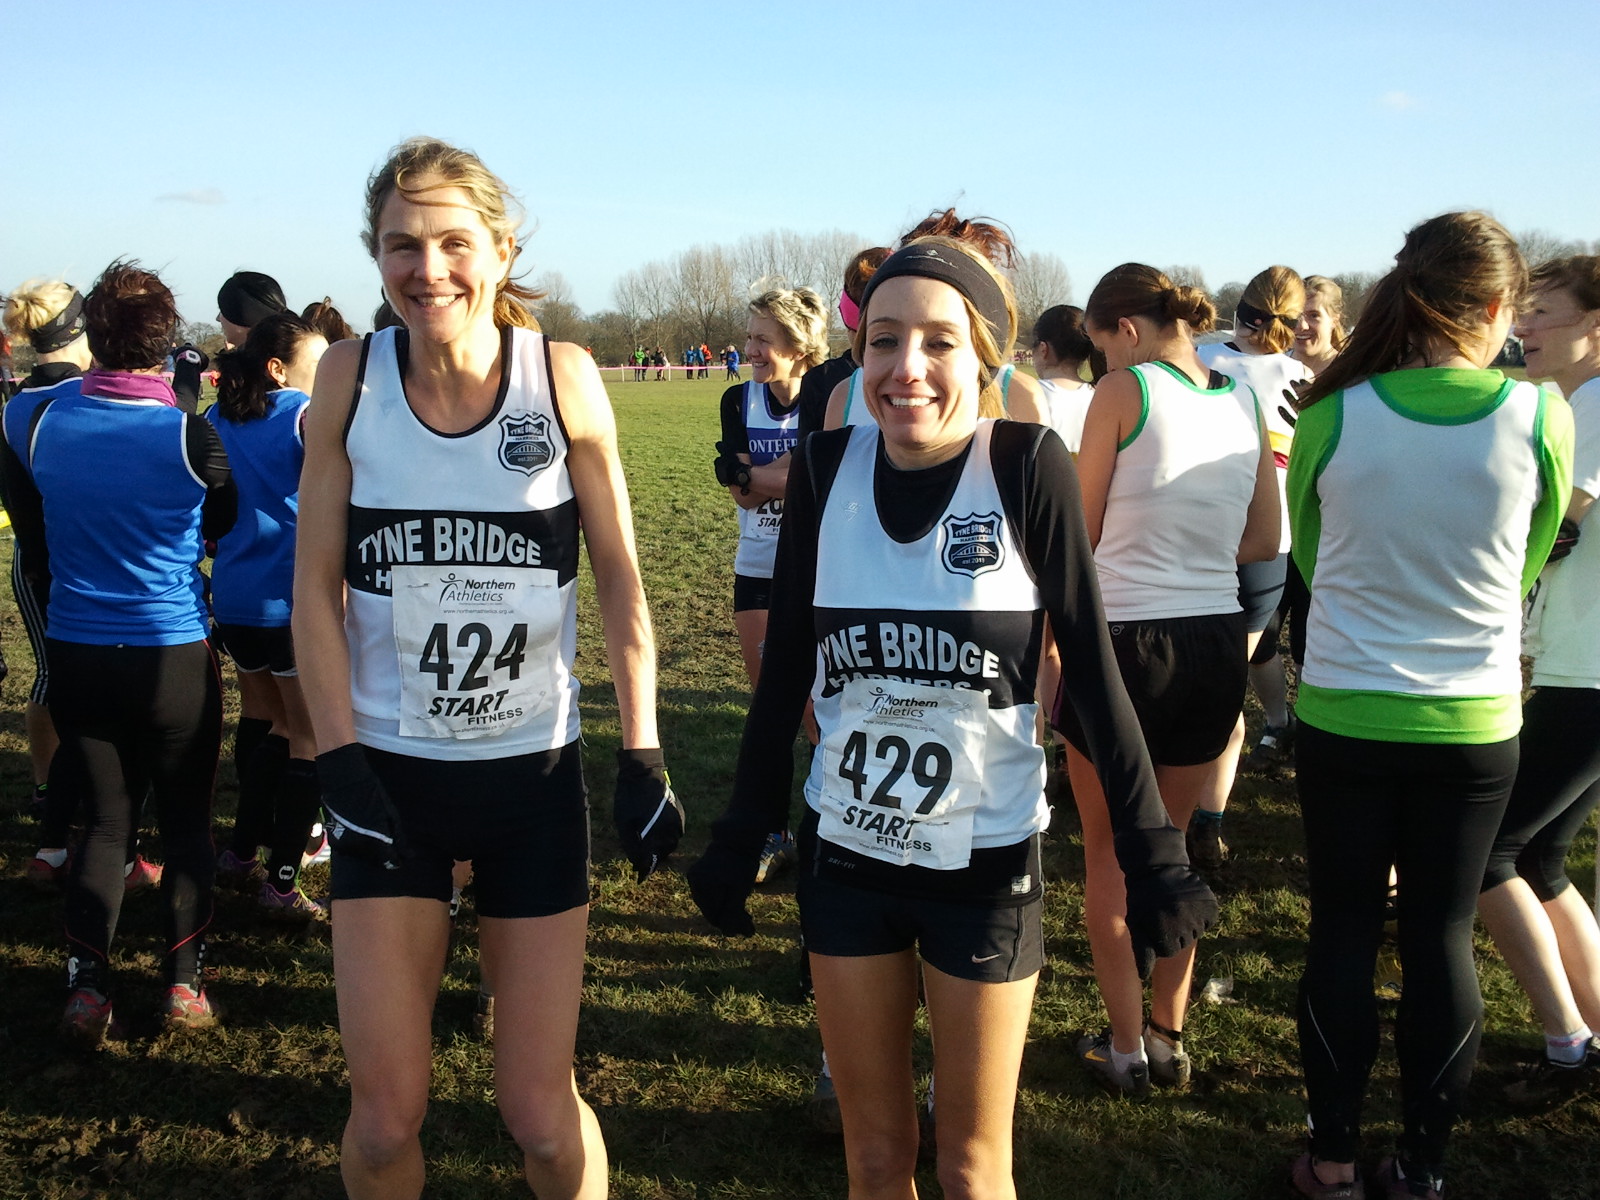 Alison and Louise ready to race.